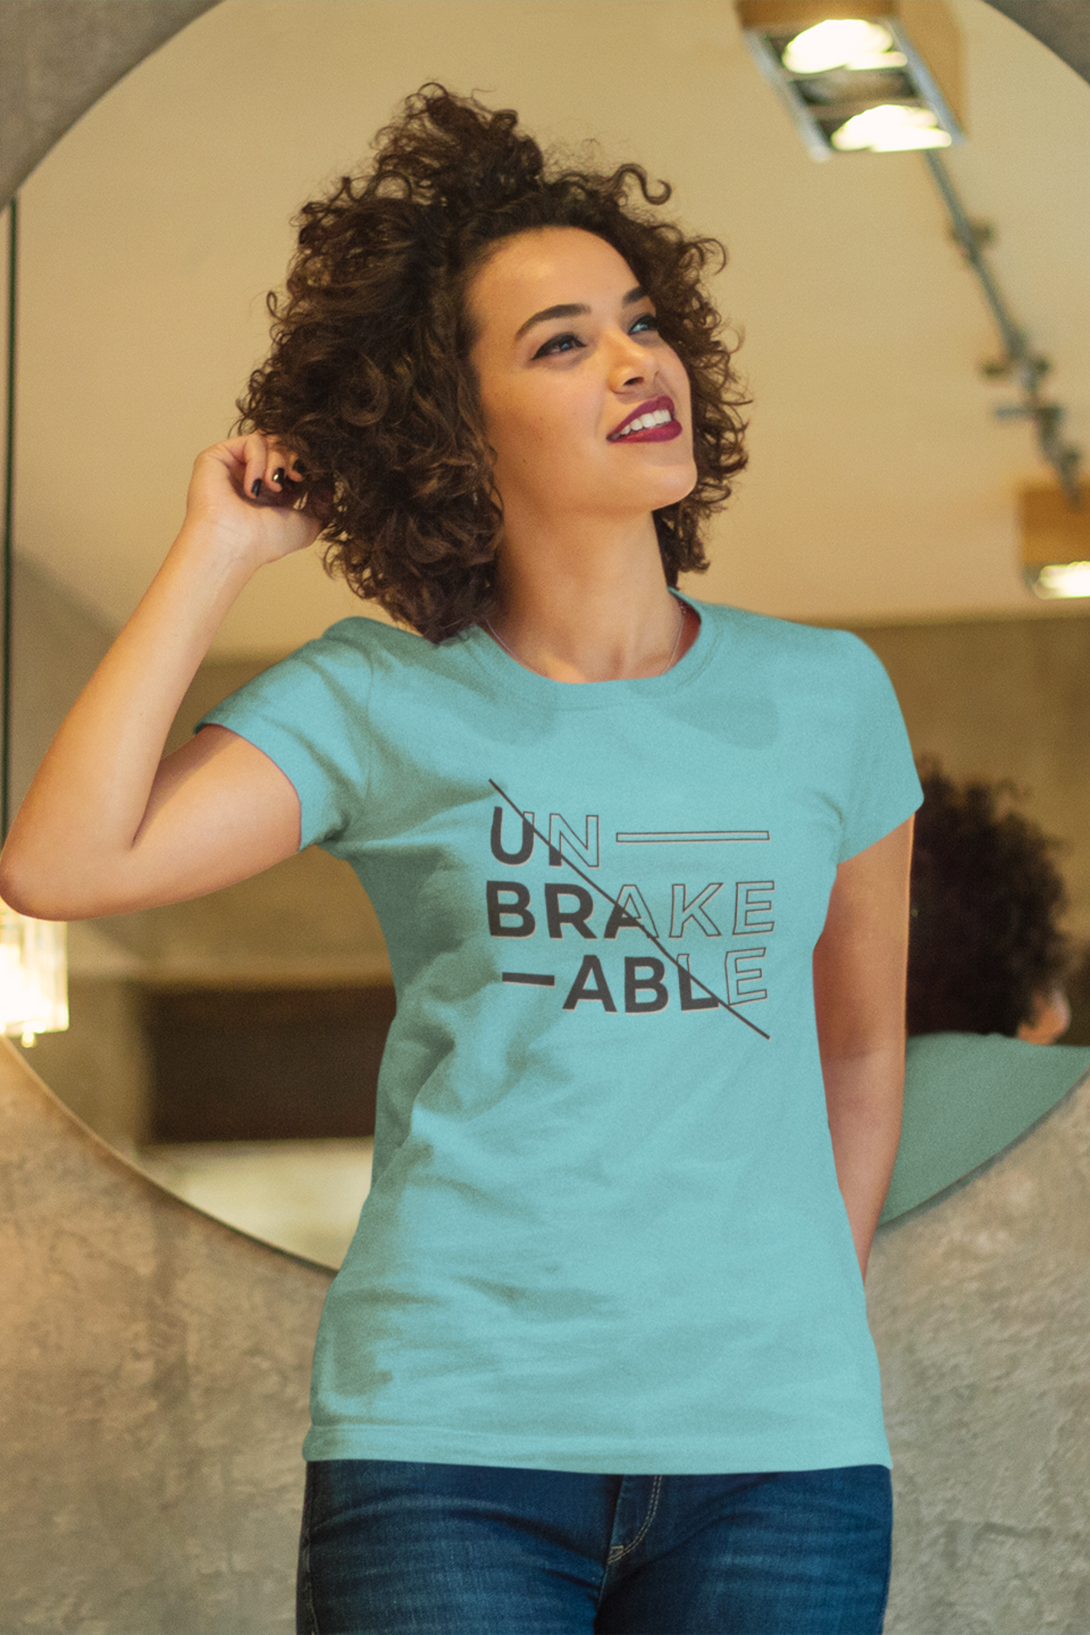 Unbreakable Printed T-Shirt For Women - WowWaves - 2